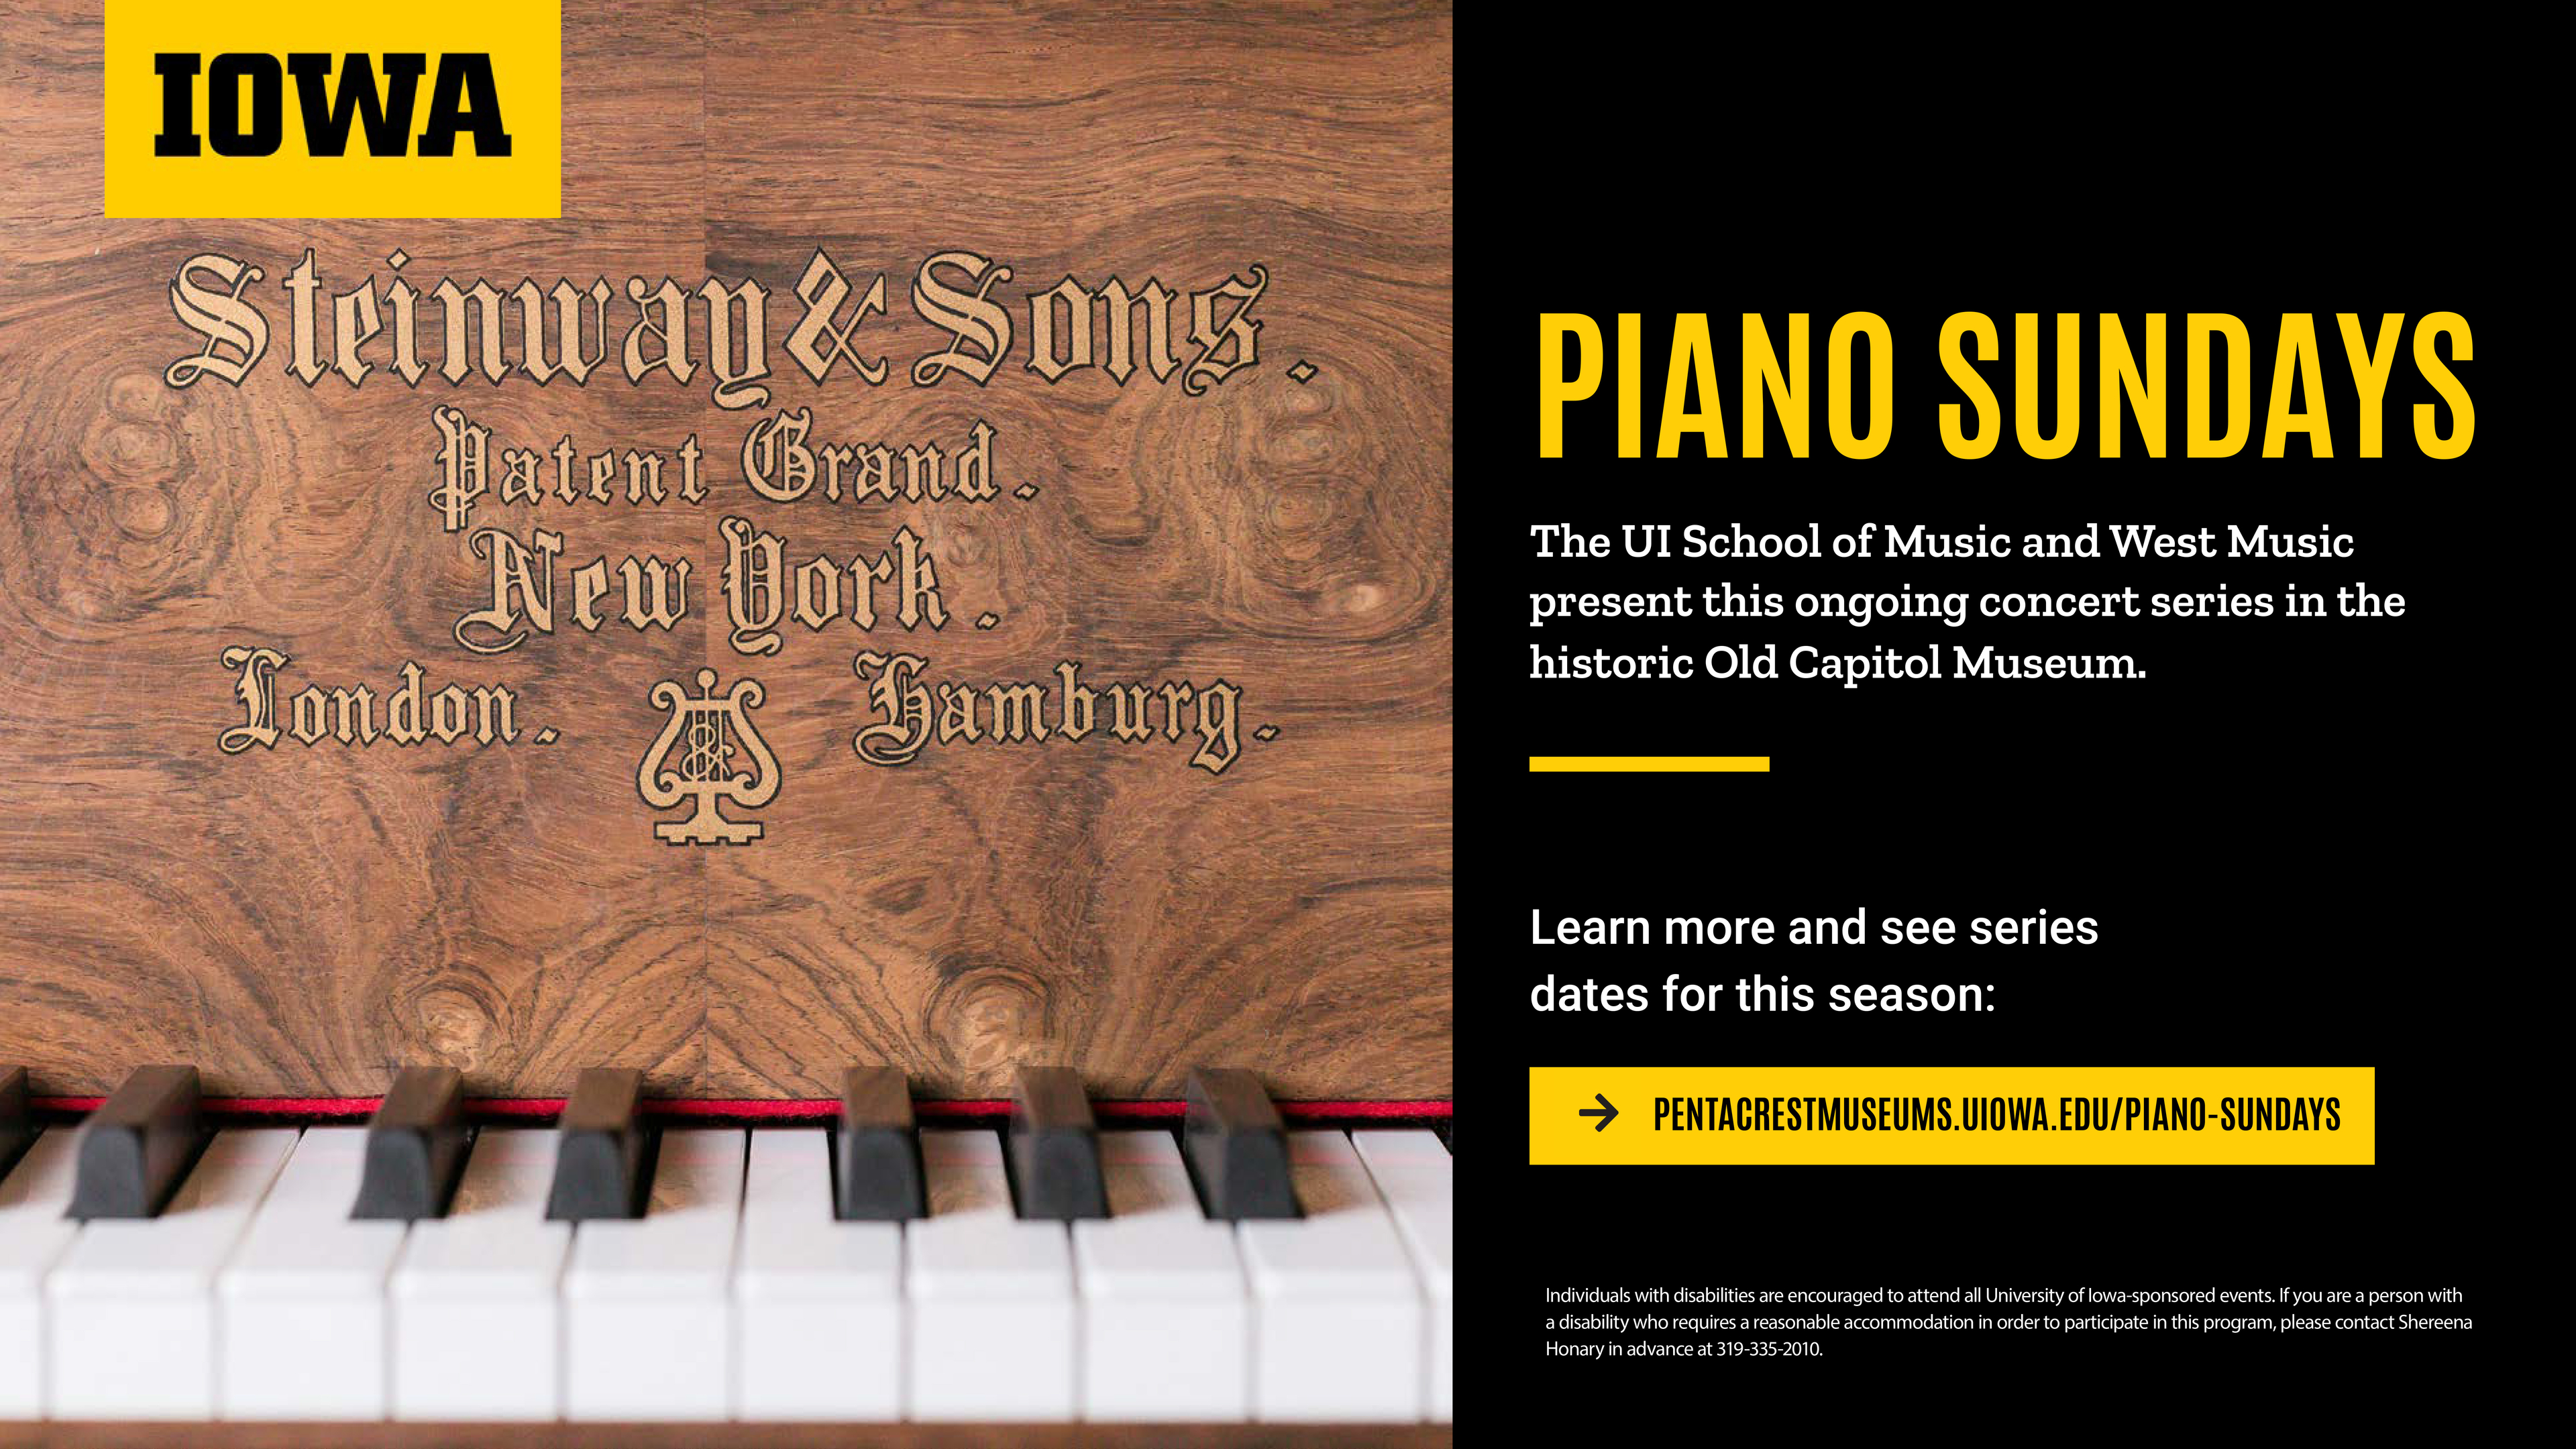 Piano Sundays series at the Old Capitol Museum